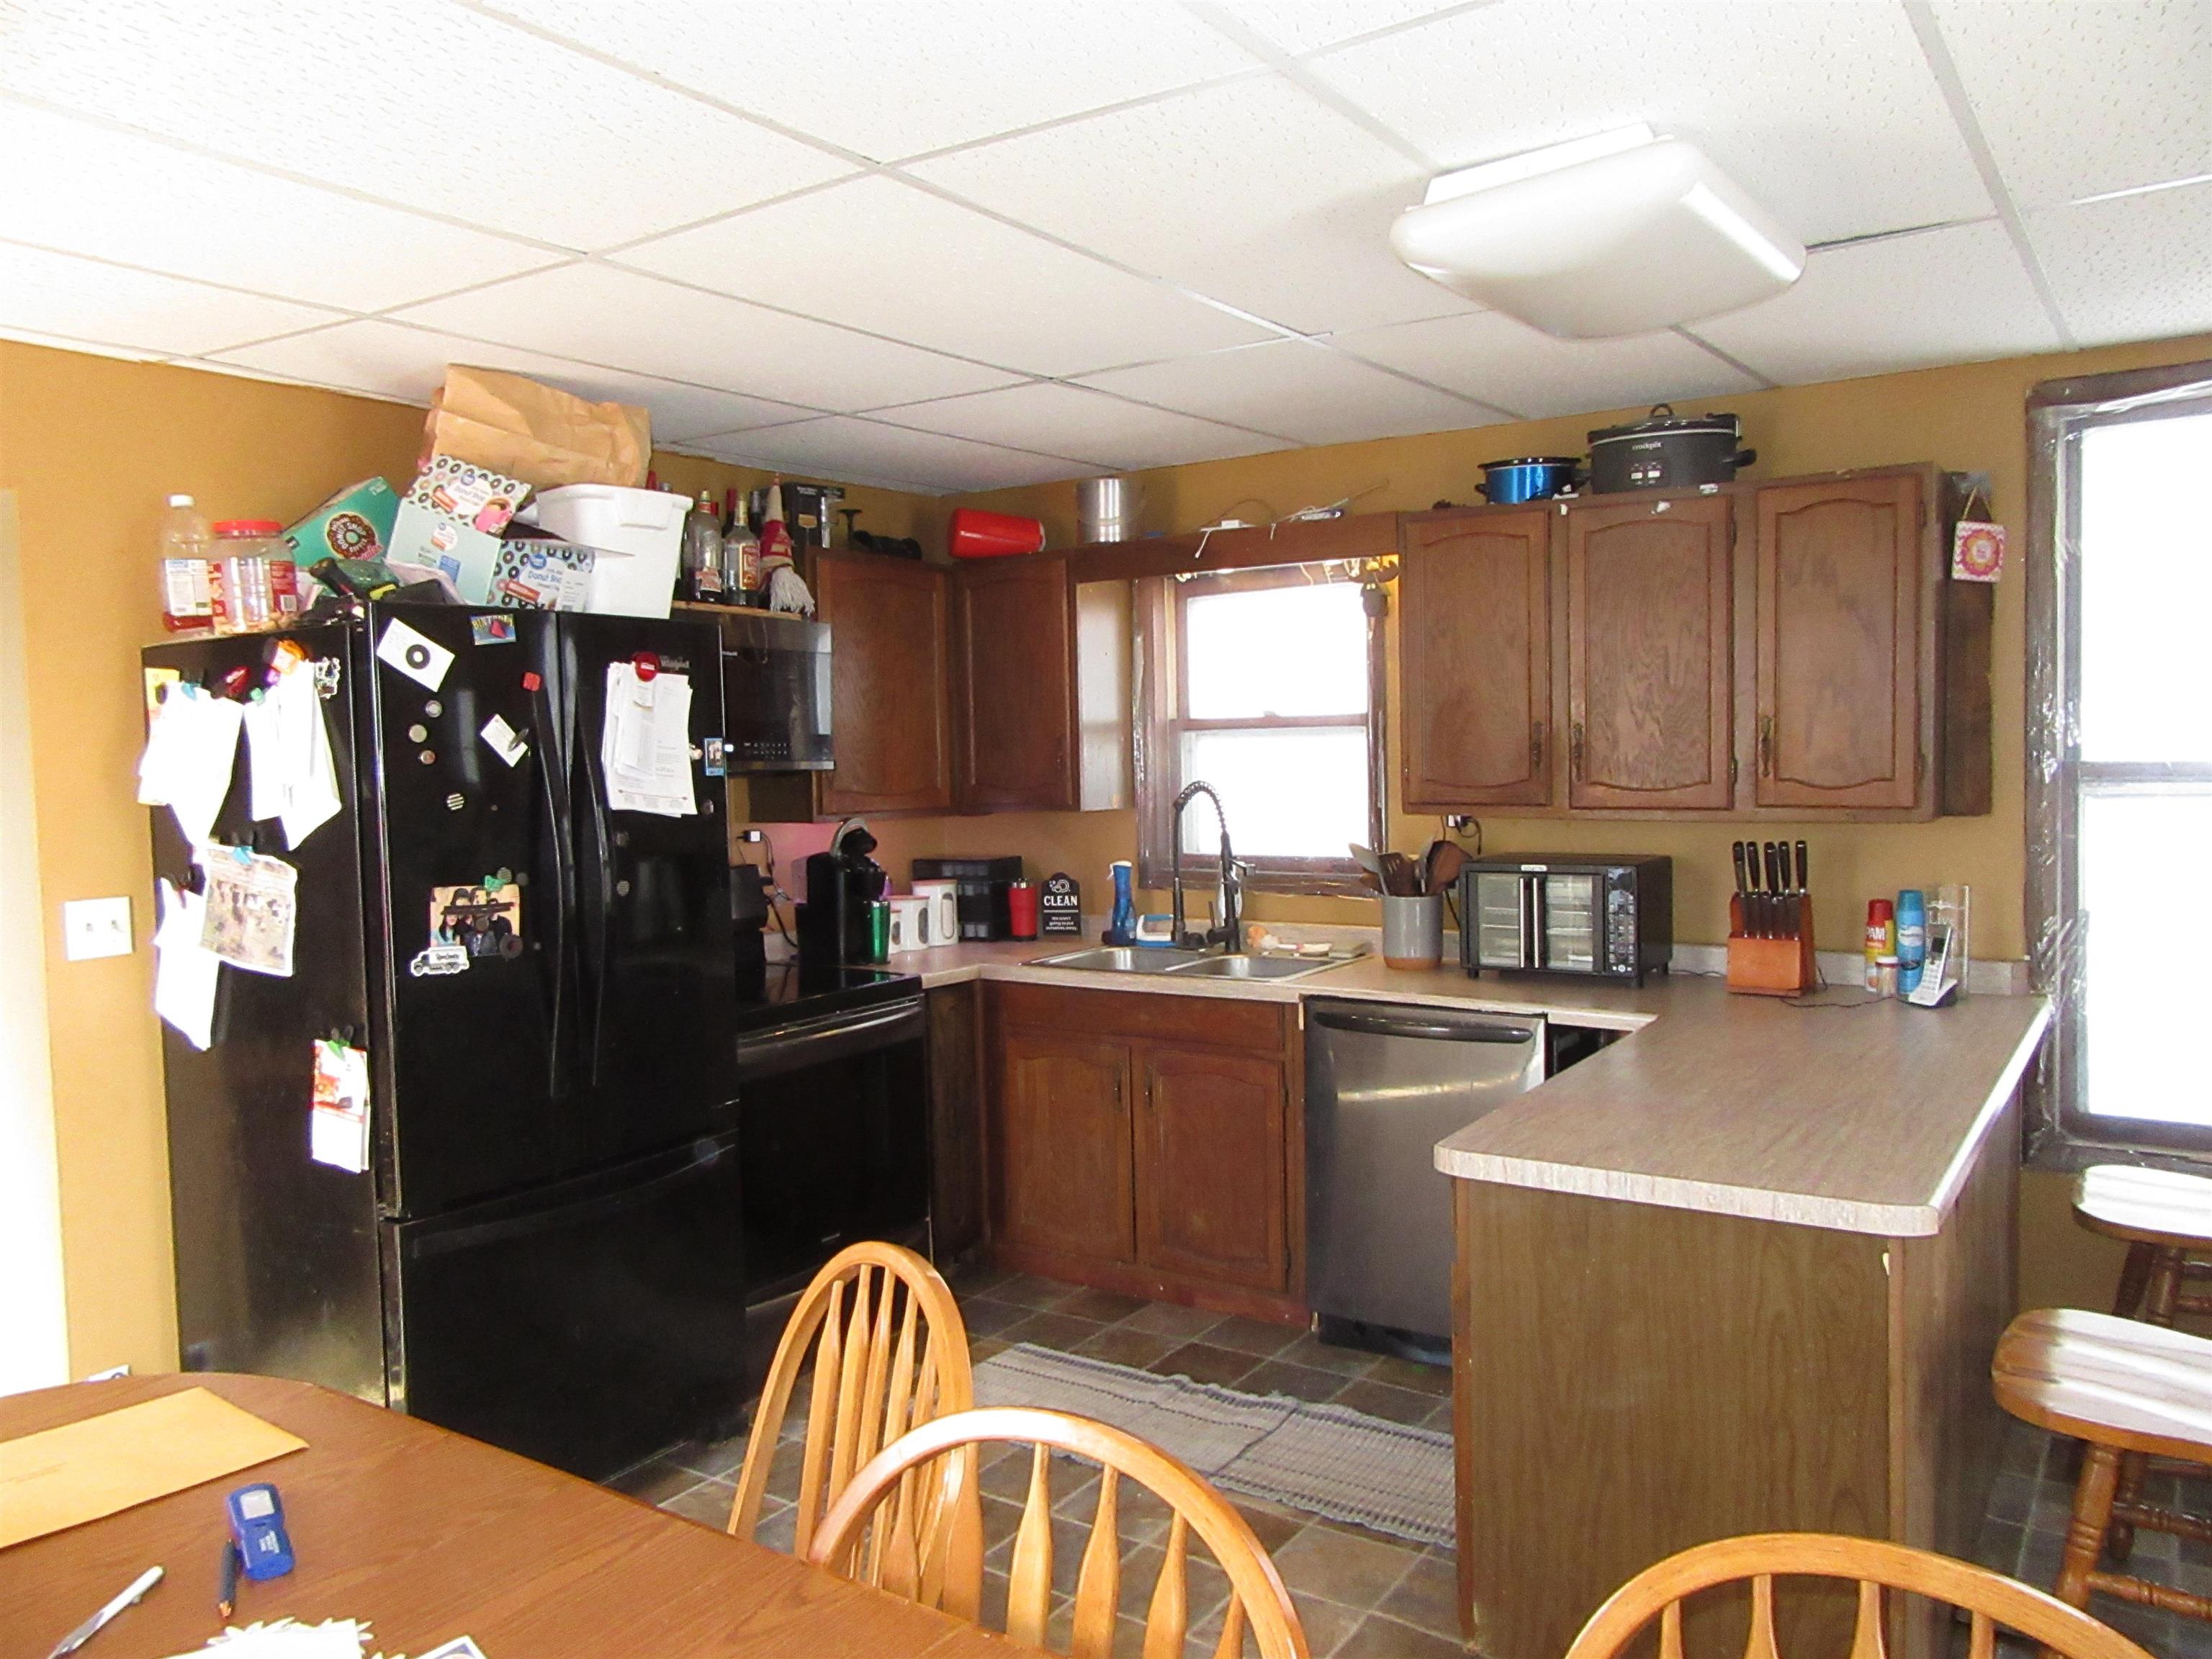 202 E 9TH STREET, Neillsville, Wisconsin 54456, 4 Bedrooms Bedrooms, ,2 BathroomsBathrooms,Residential,For Sale,202 E 9TH STREET,22400885